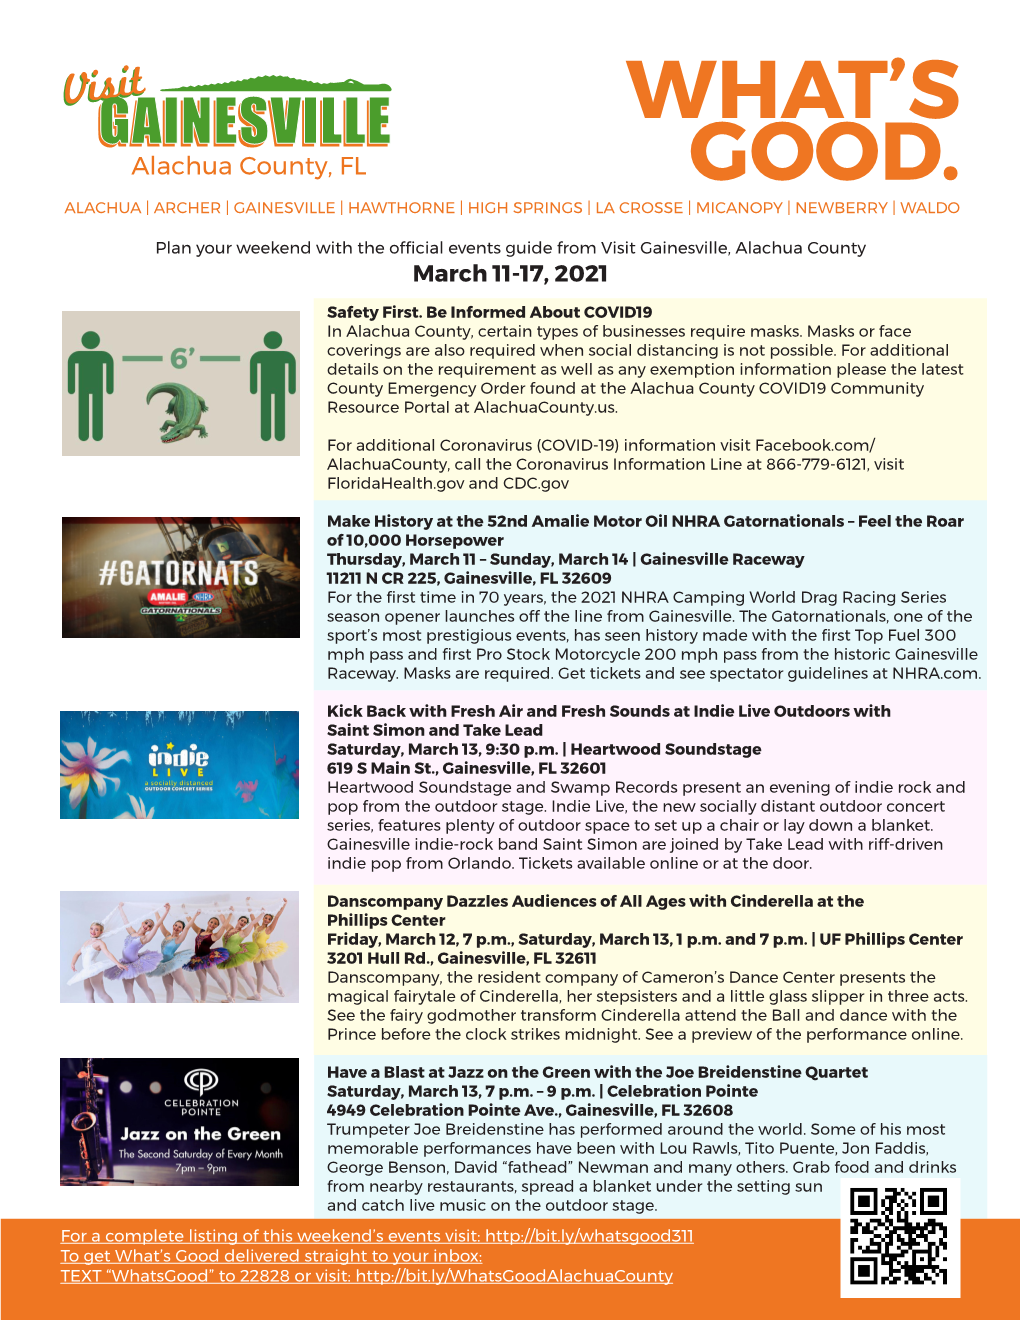 Whats Good Events Guide March 11-17 Gainesville and Alachua